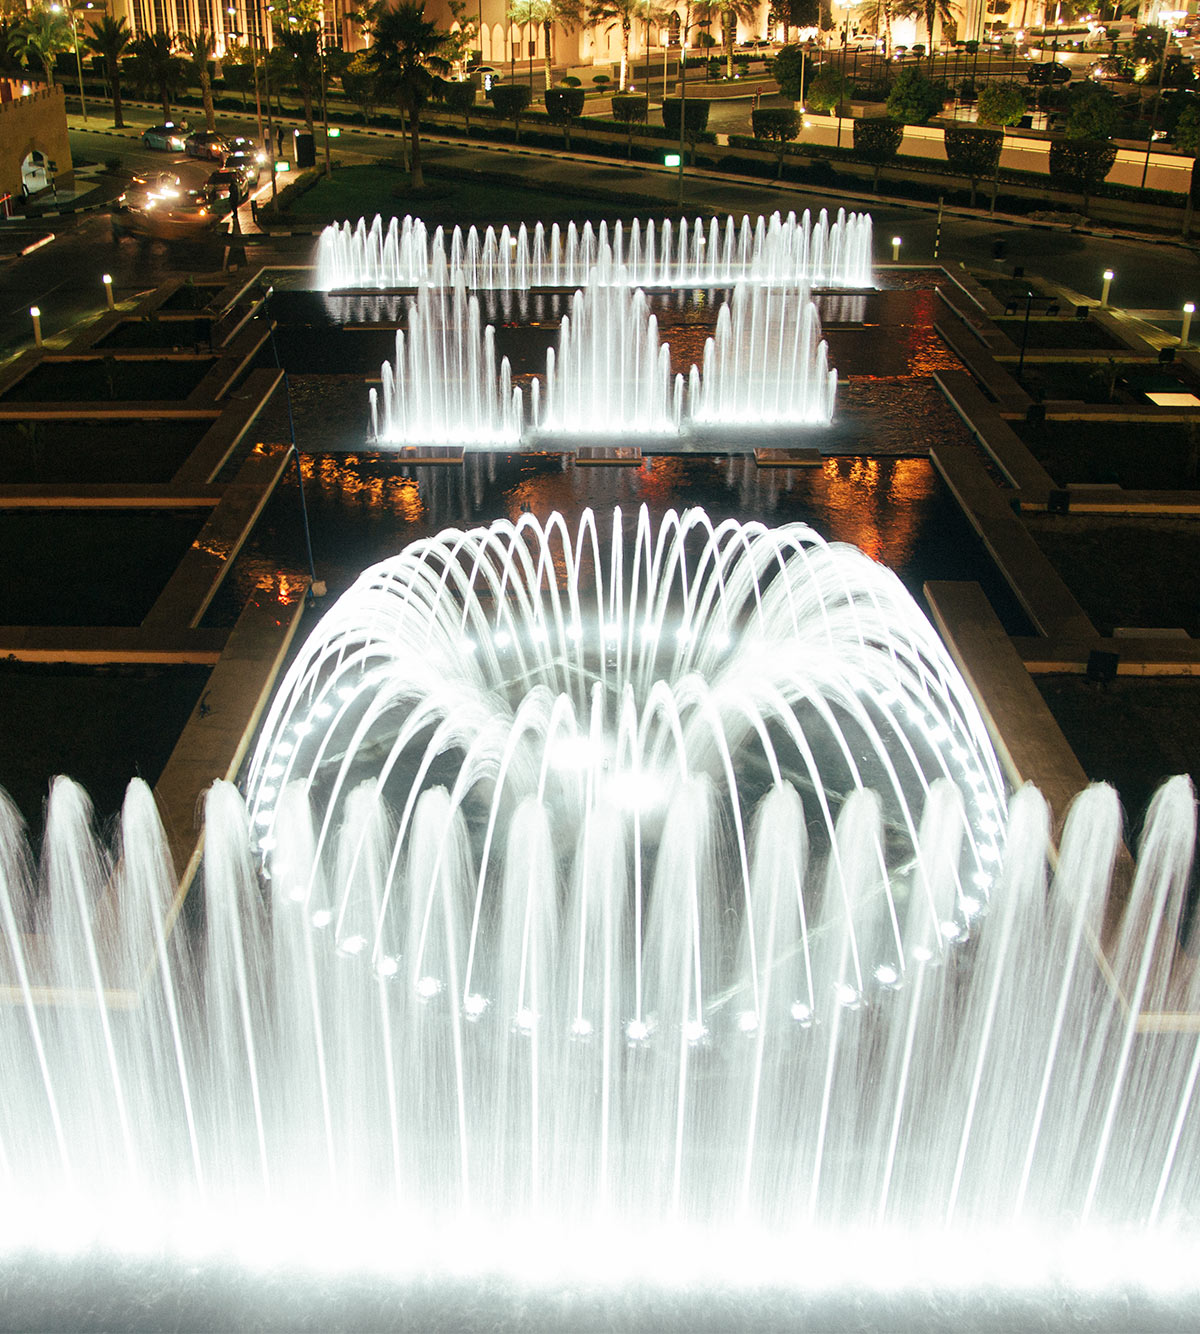 A custom musical fountain by Fontana fountains with various water feature components in a choreography.